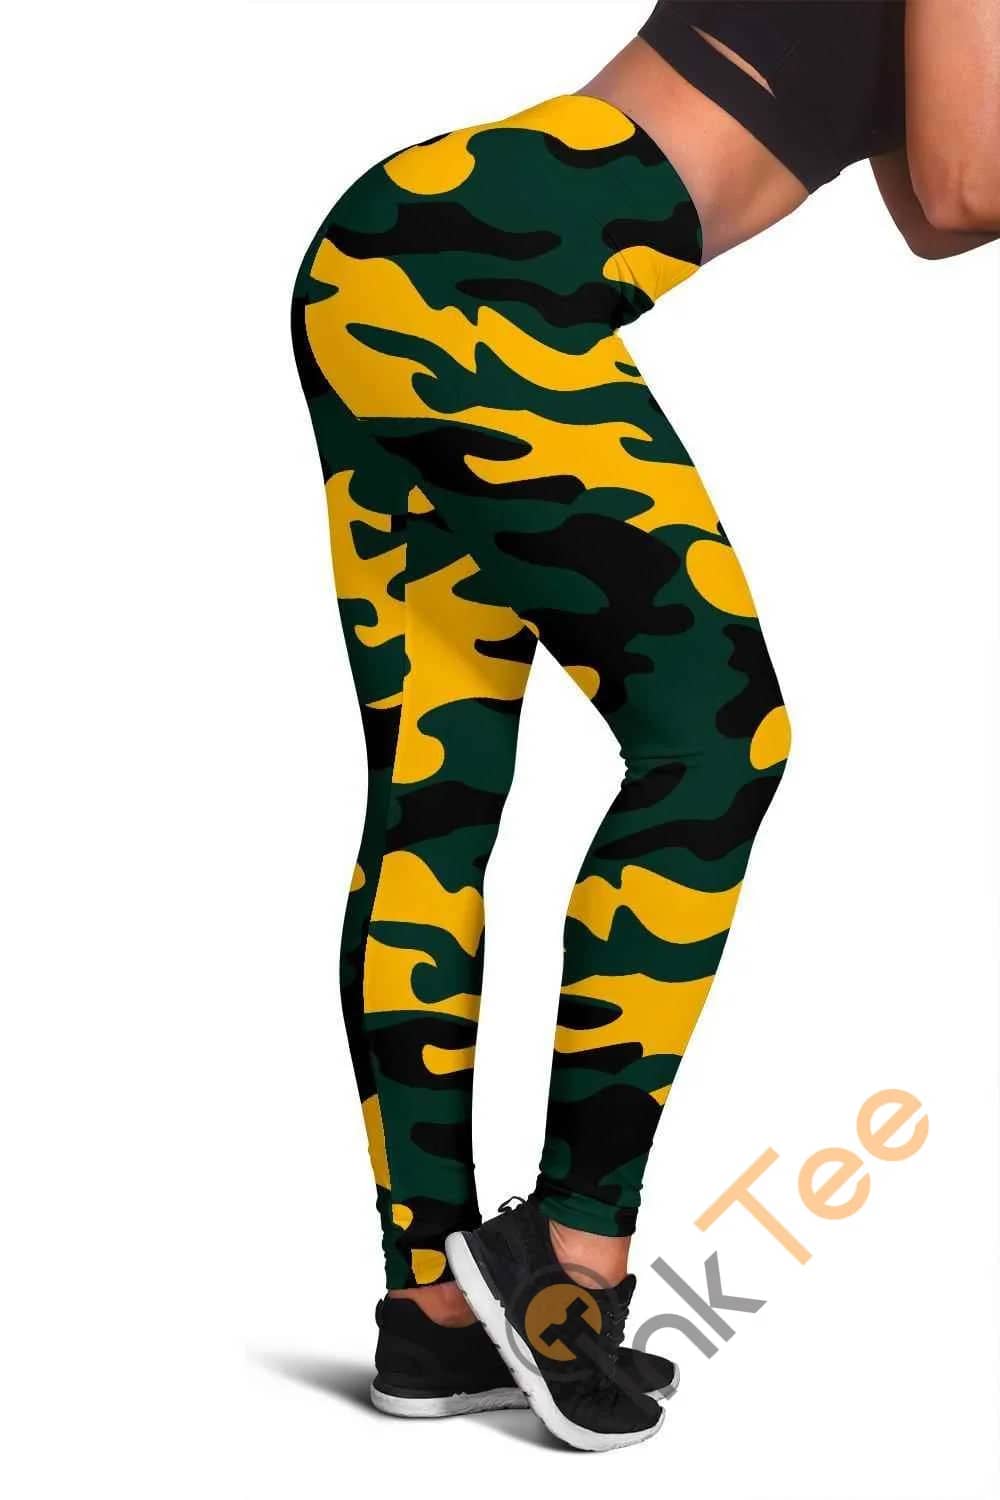 Green Bay Packers Inspired Tru Camo 3D All Over Print For Yoga Fitness Fashion Women'S Leggings